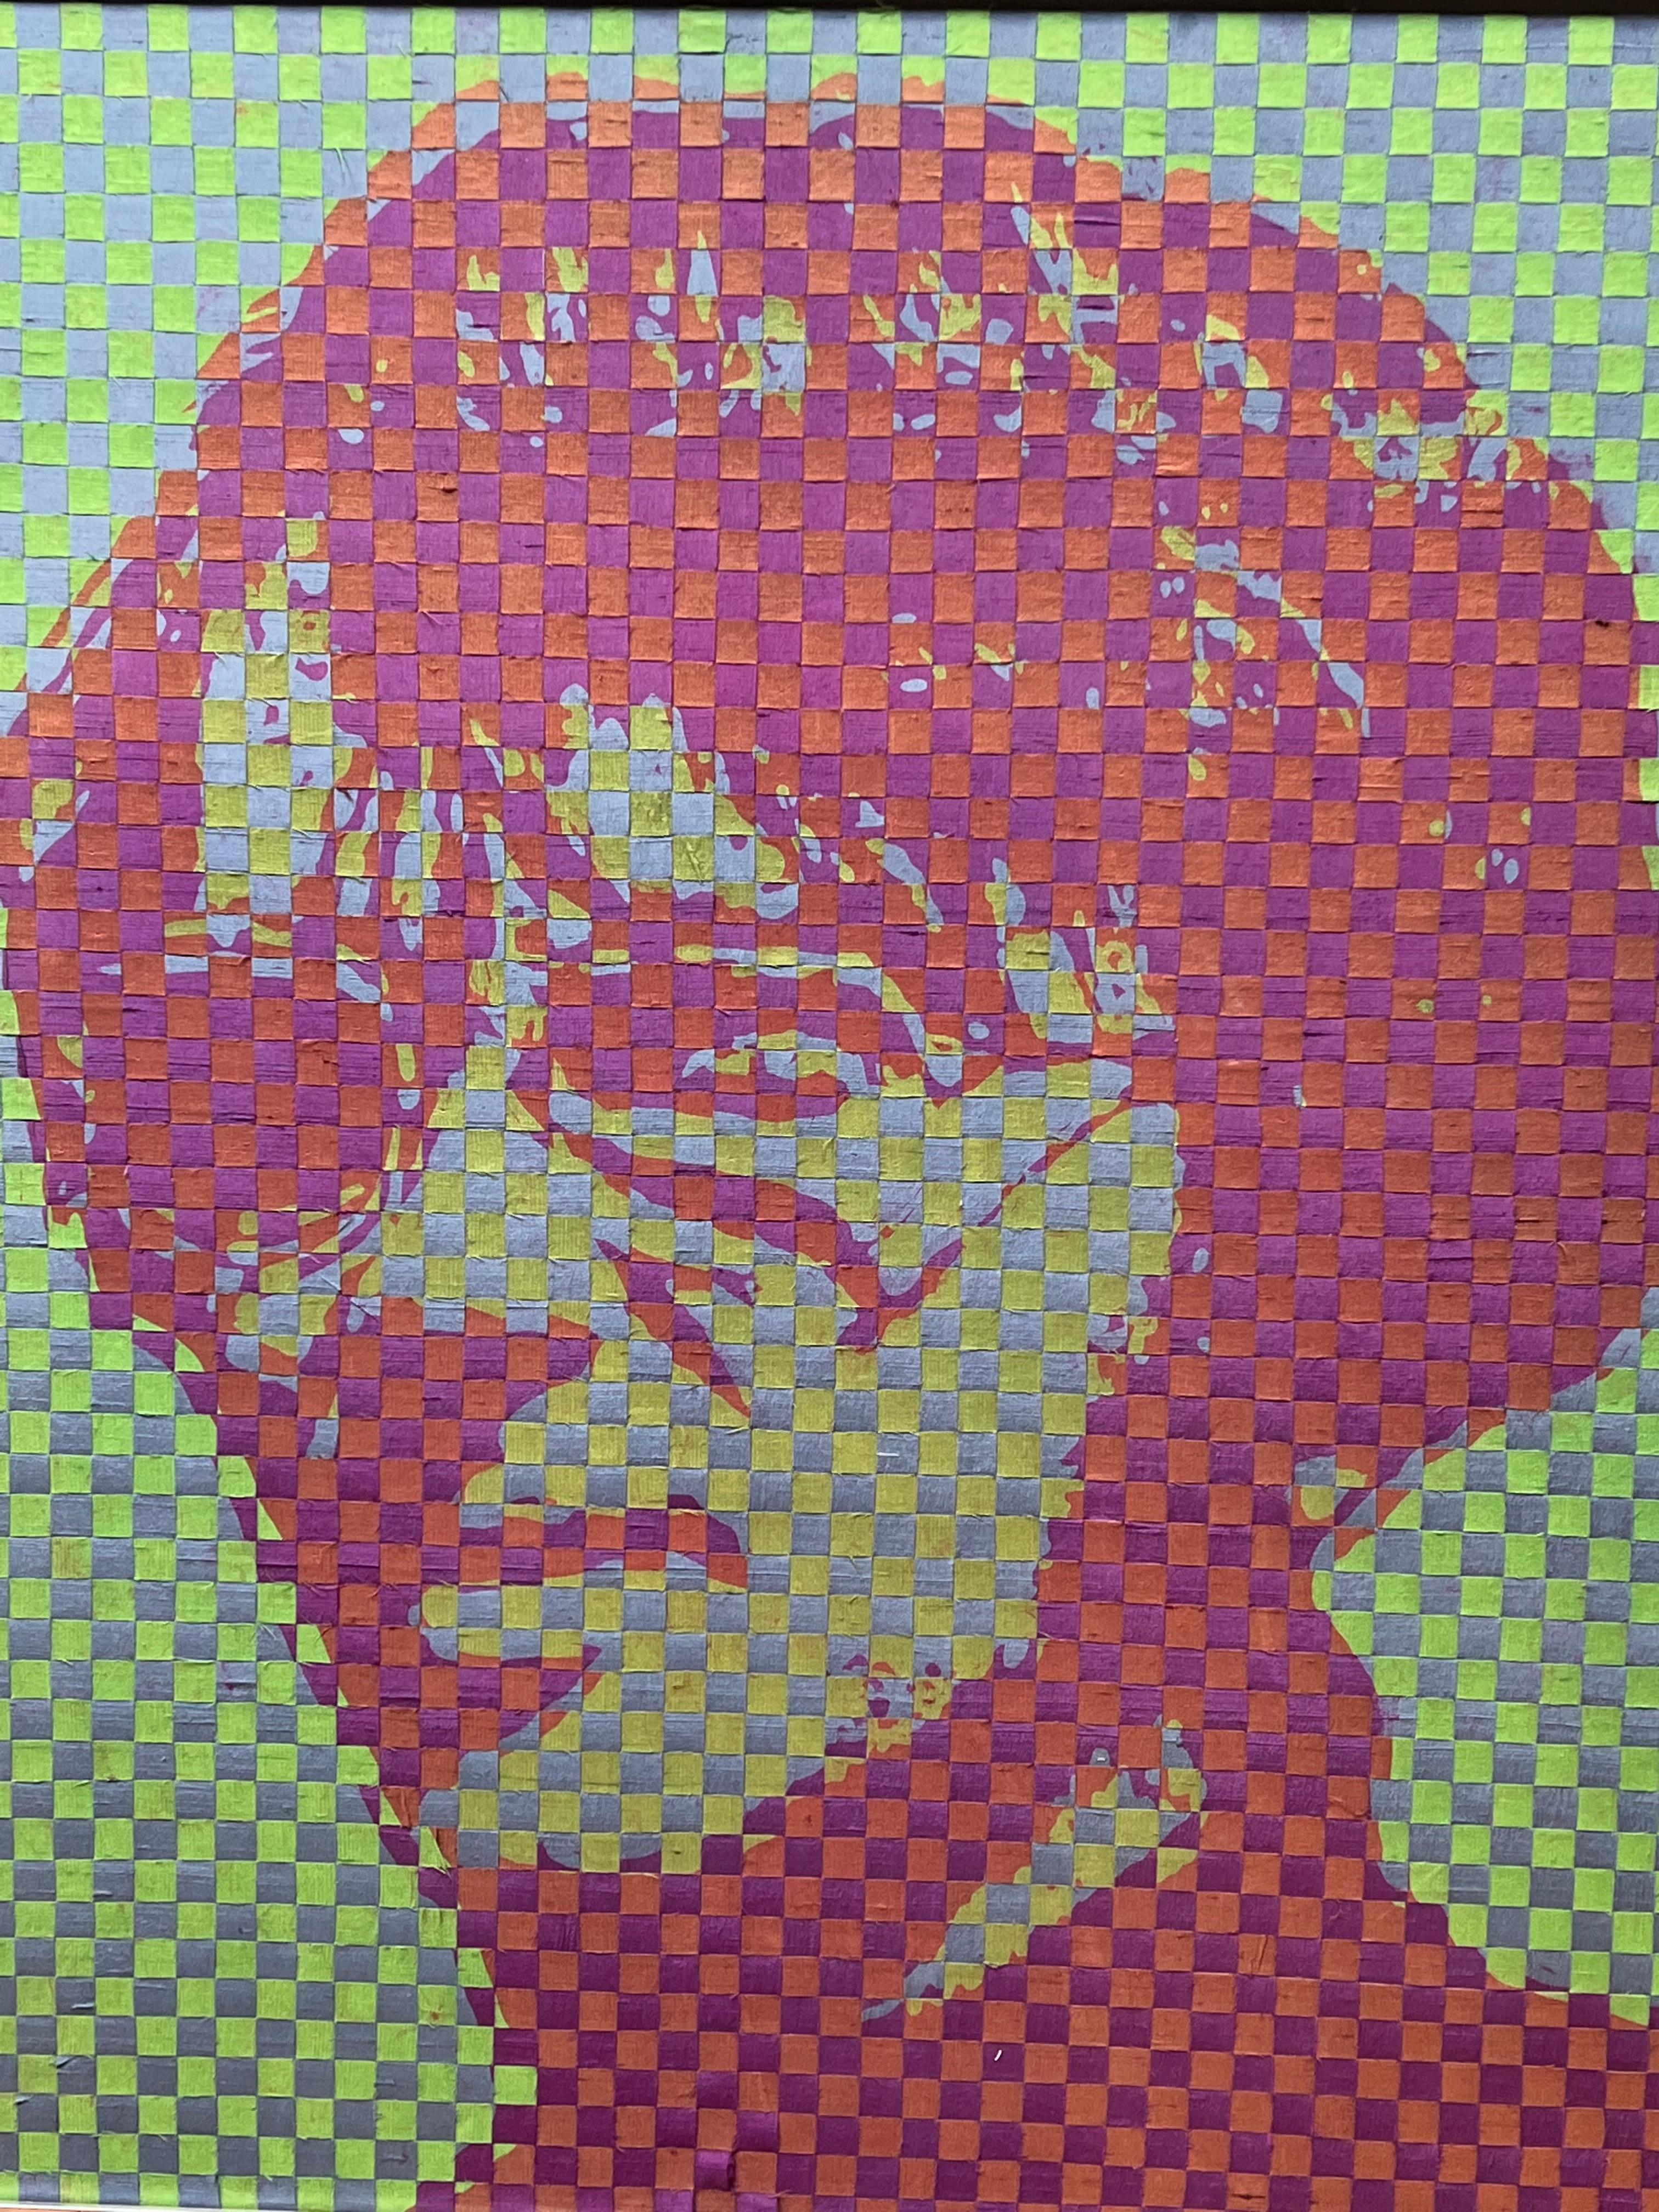 This unique artwork by Richard Proctor is part of a series of 3 (see last pictures and other listings). It is a self-portrait repeated 3 times in different colors.
It has been created by interweaving different colored strips of fabric in order to